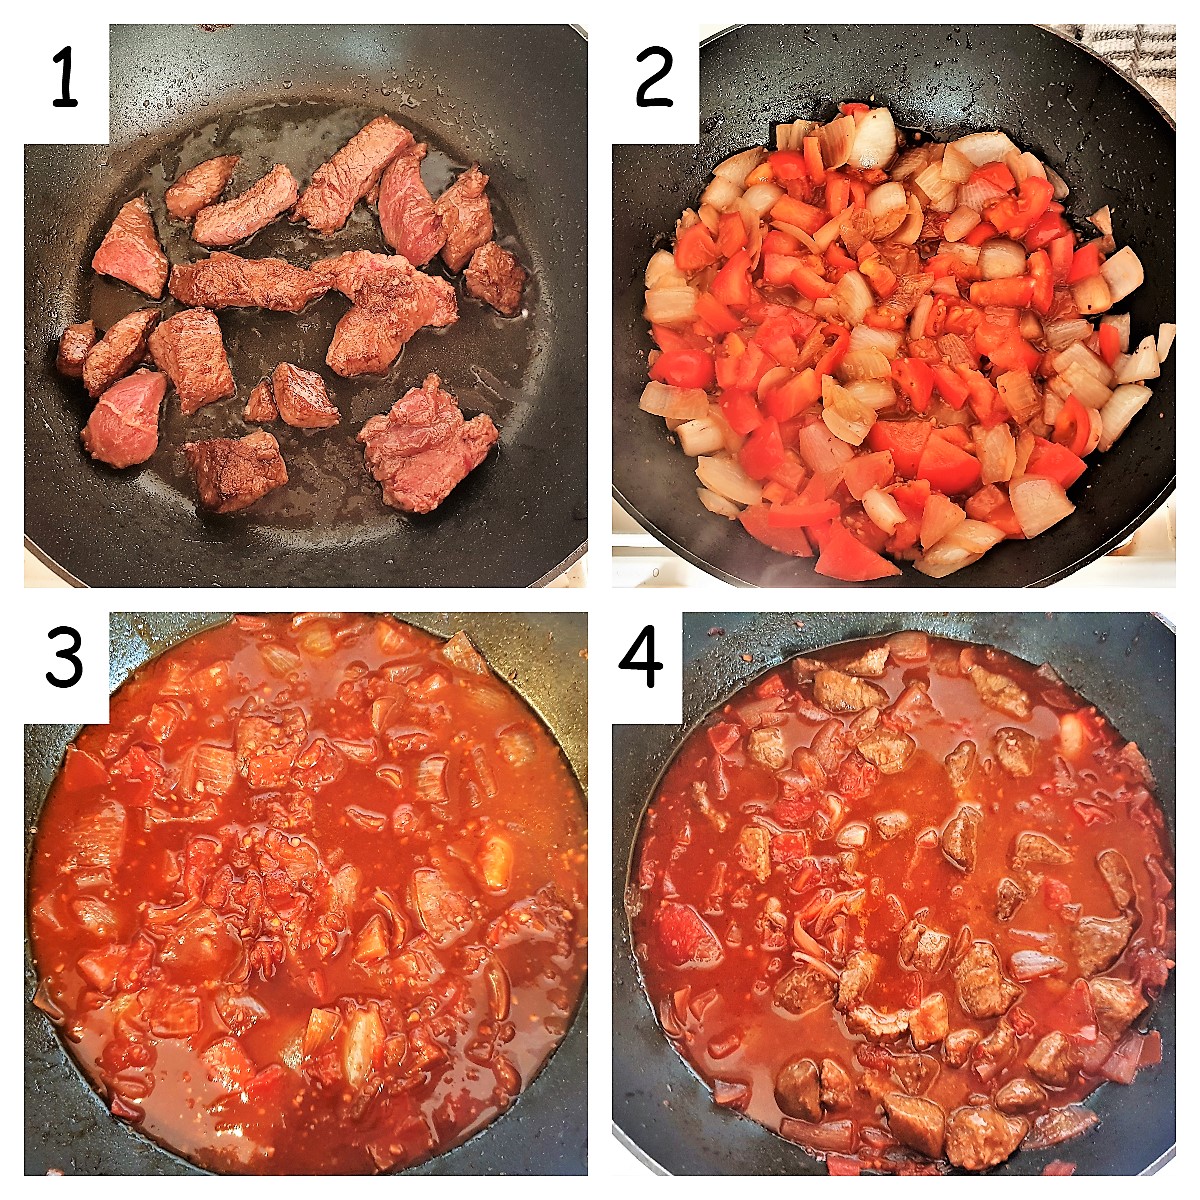 Collage of 4 images showing steps for making the trinchado gravy.